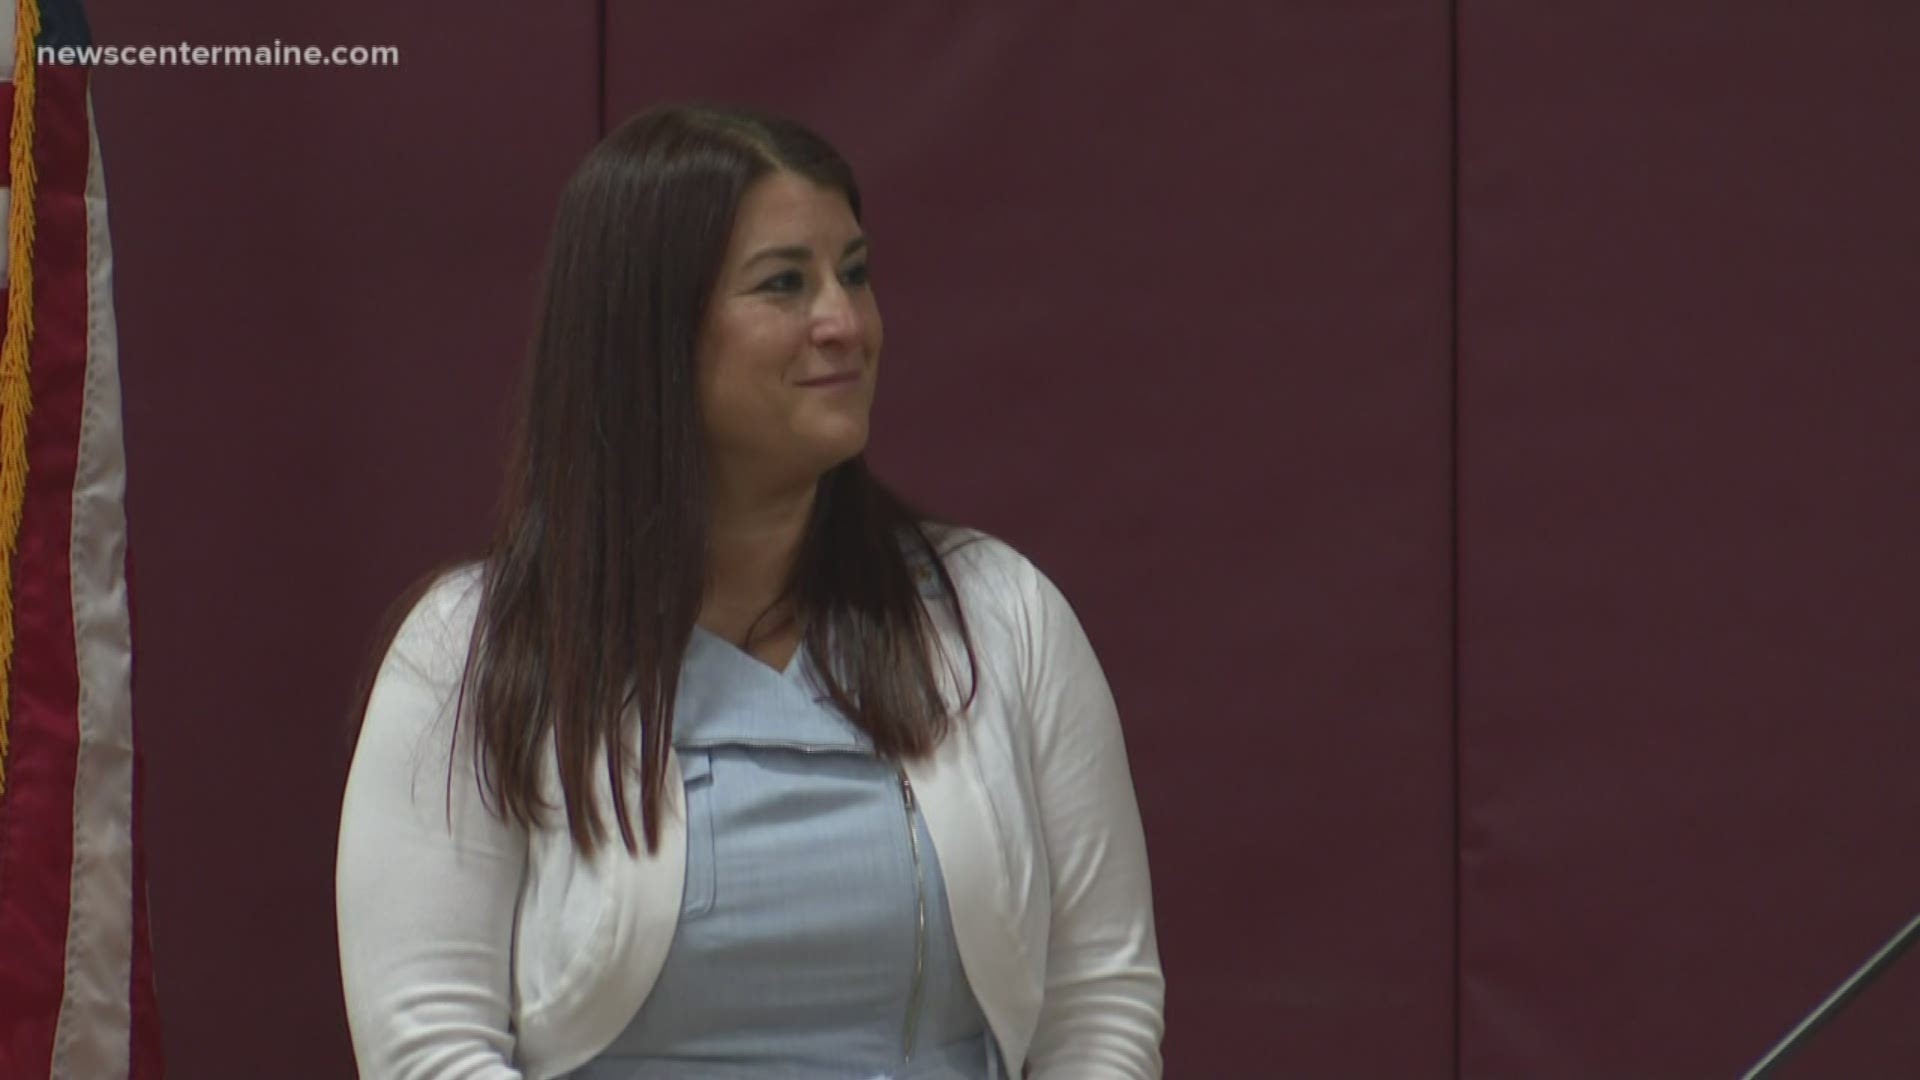 Maine's teacher of the year was honored Thursday/